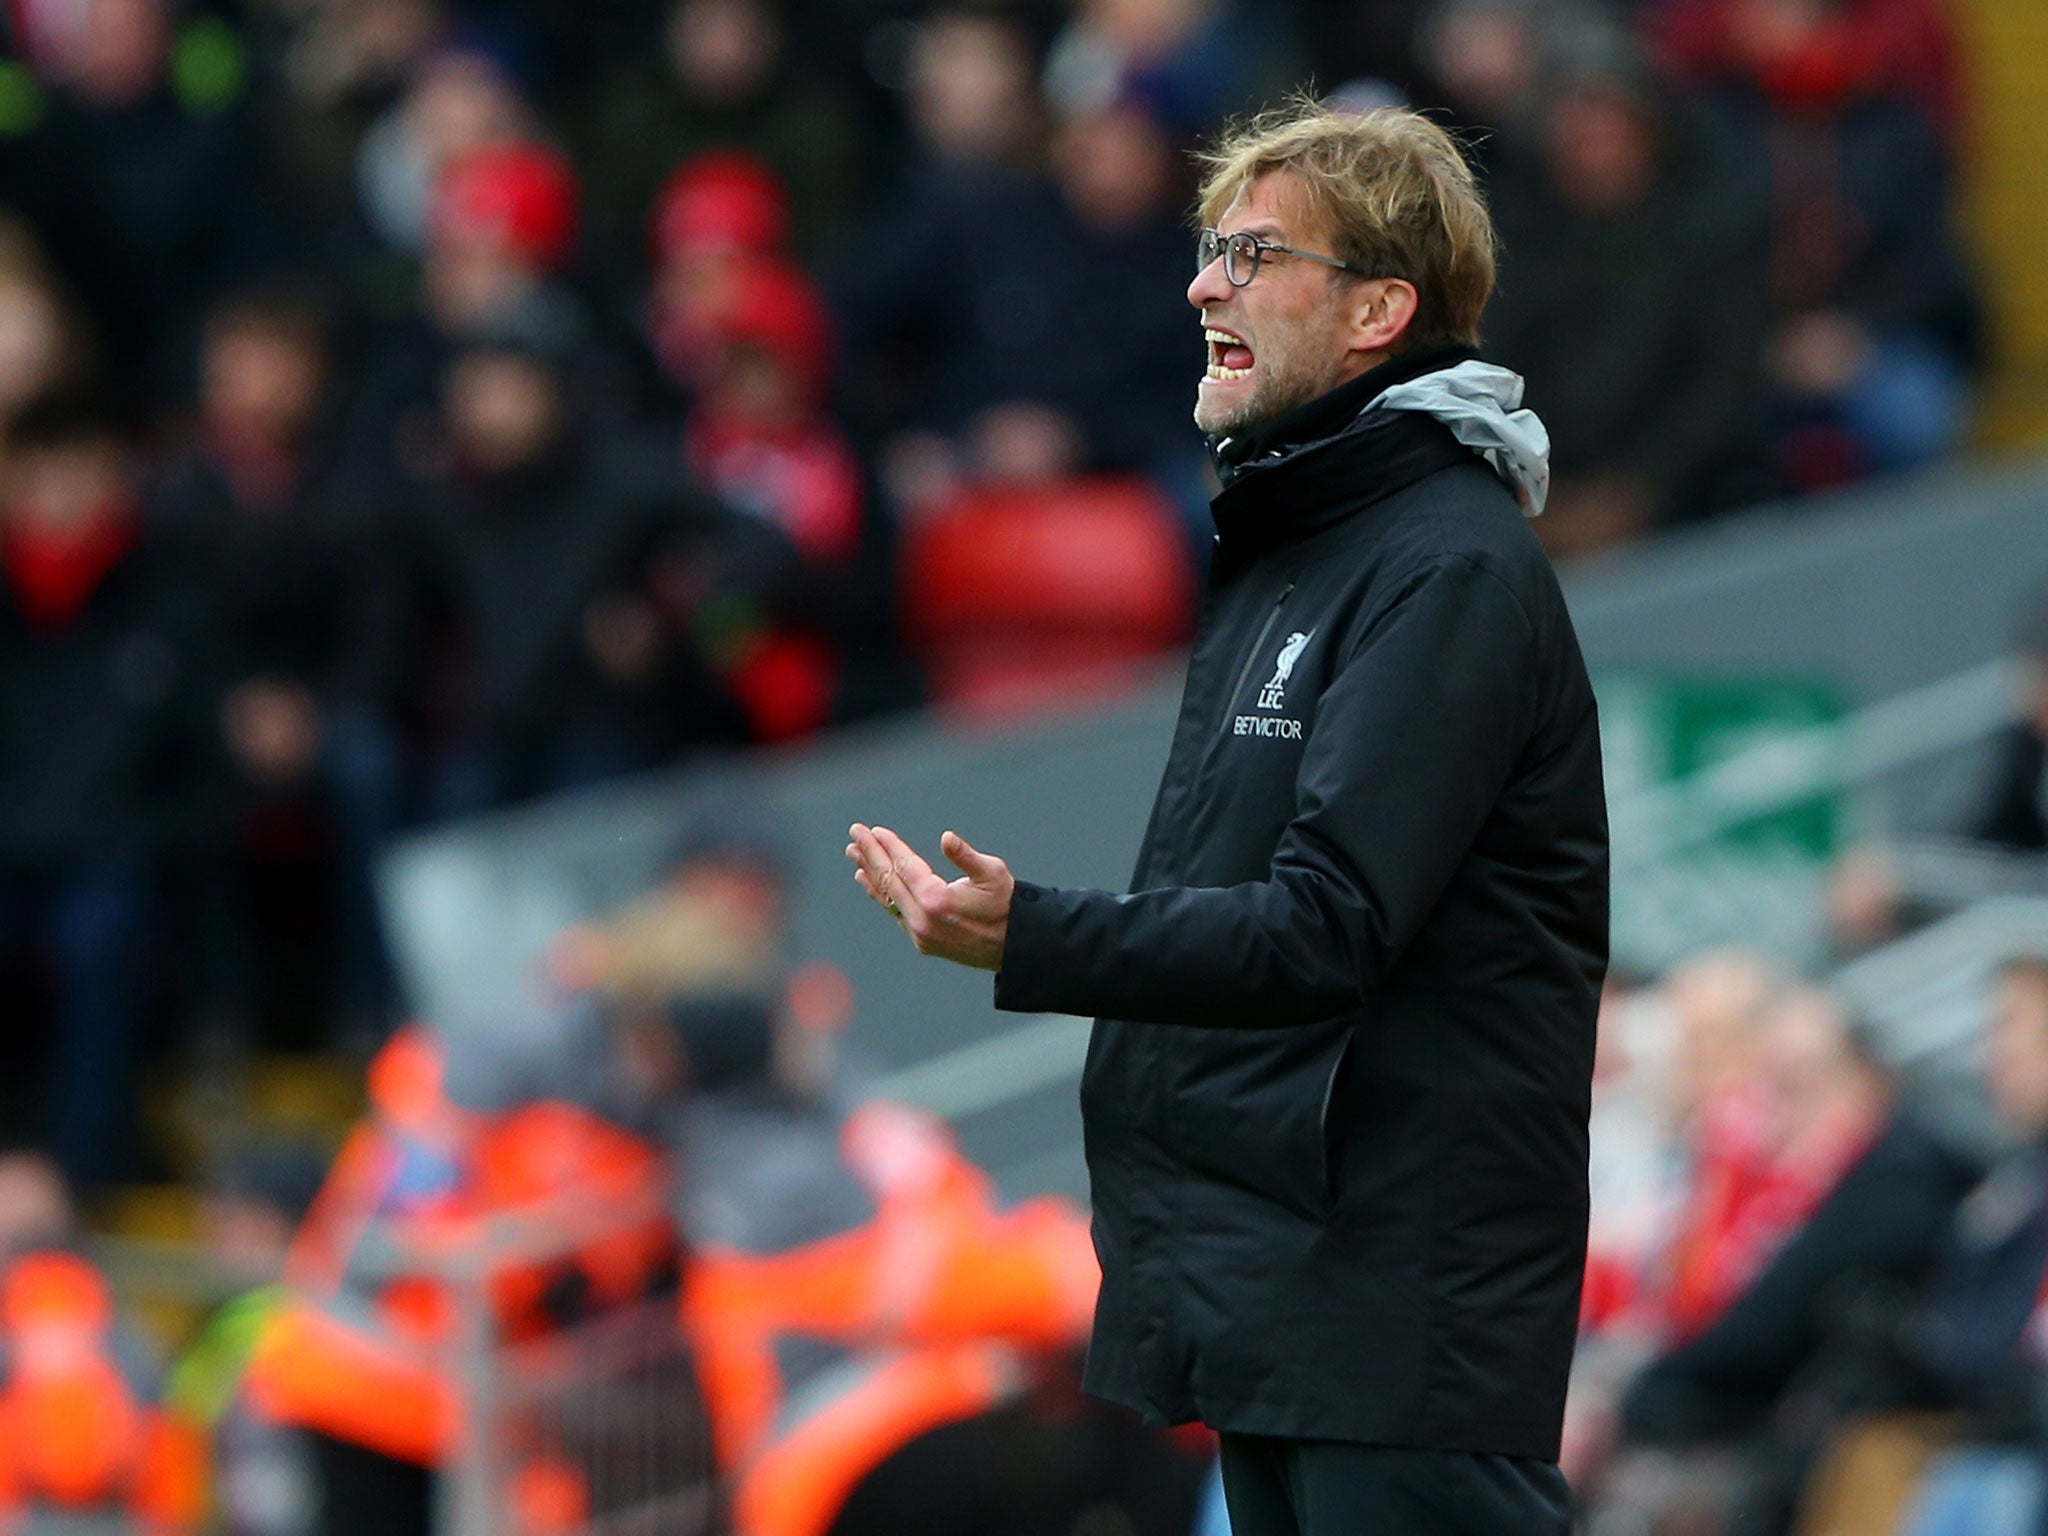 Jurgen Klopp has refused to panic as Liverpool's title hope vanish in front of their eyes